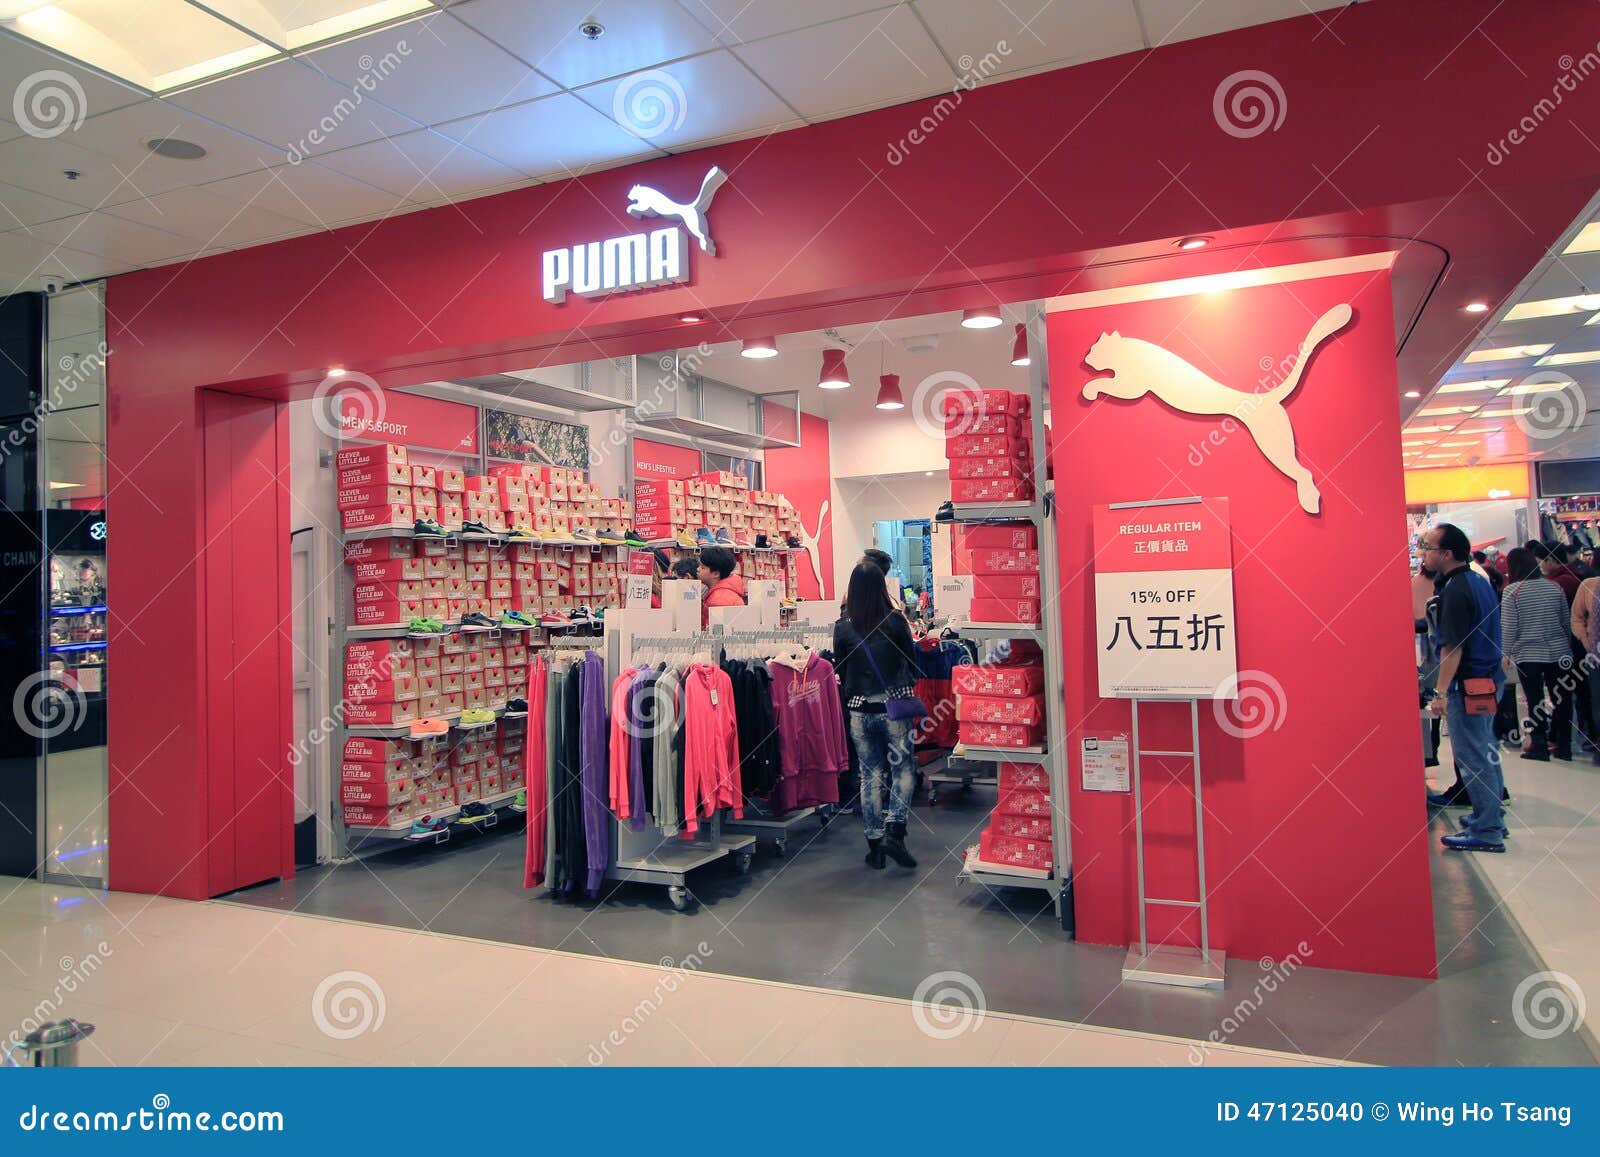 where is the closest puma store